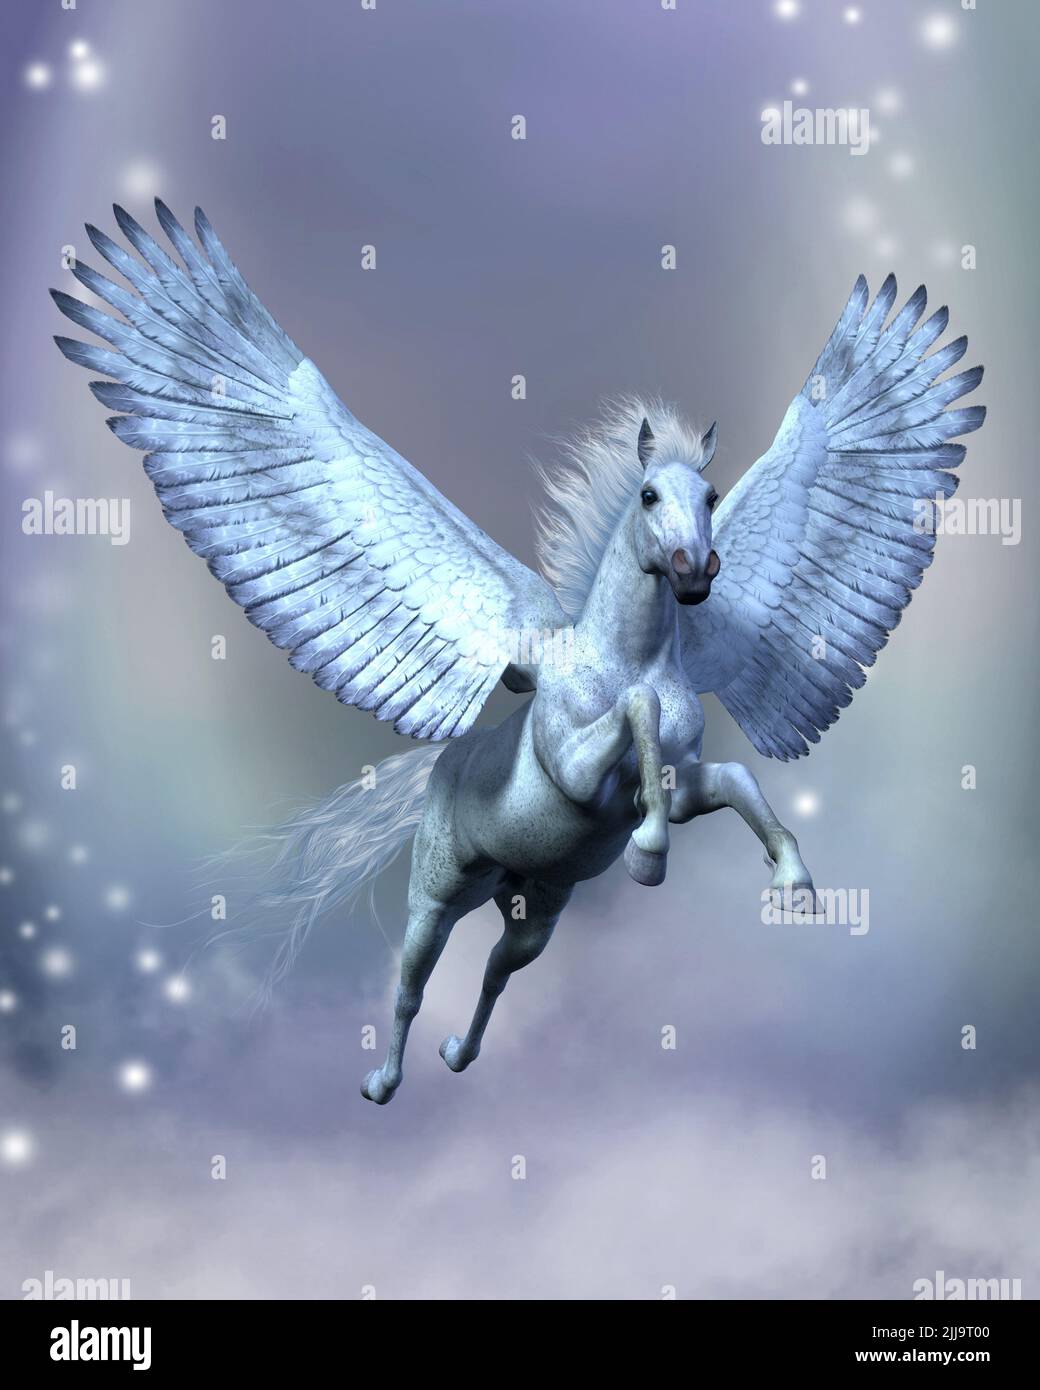 White Pegasus Fantasy - Legendary white Pegasus flies among stars and fluffy clouds on sturdy wings. Stock Photo